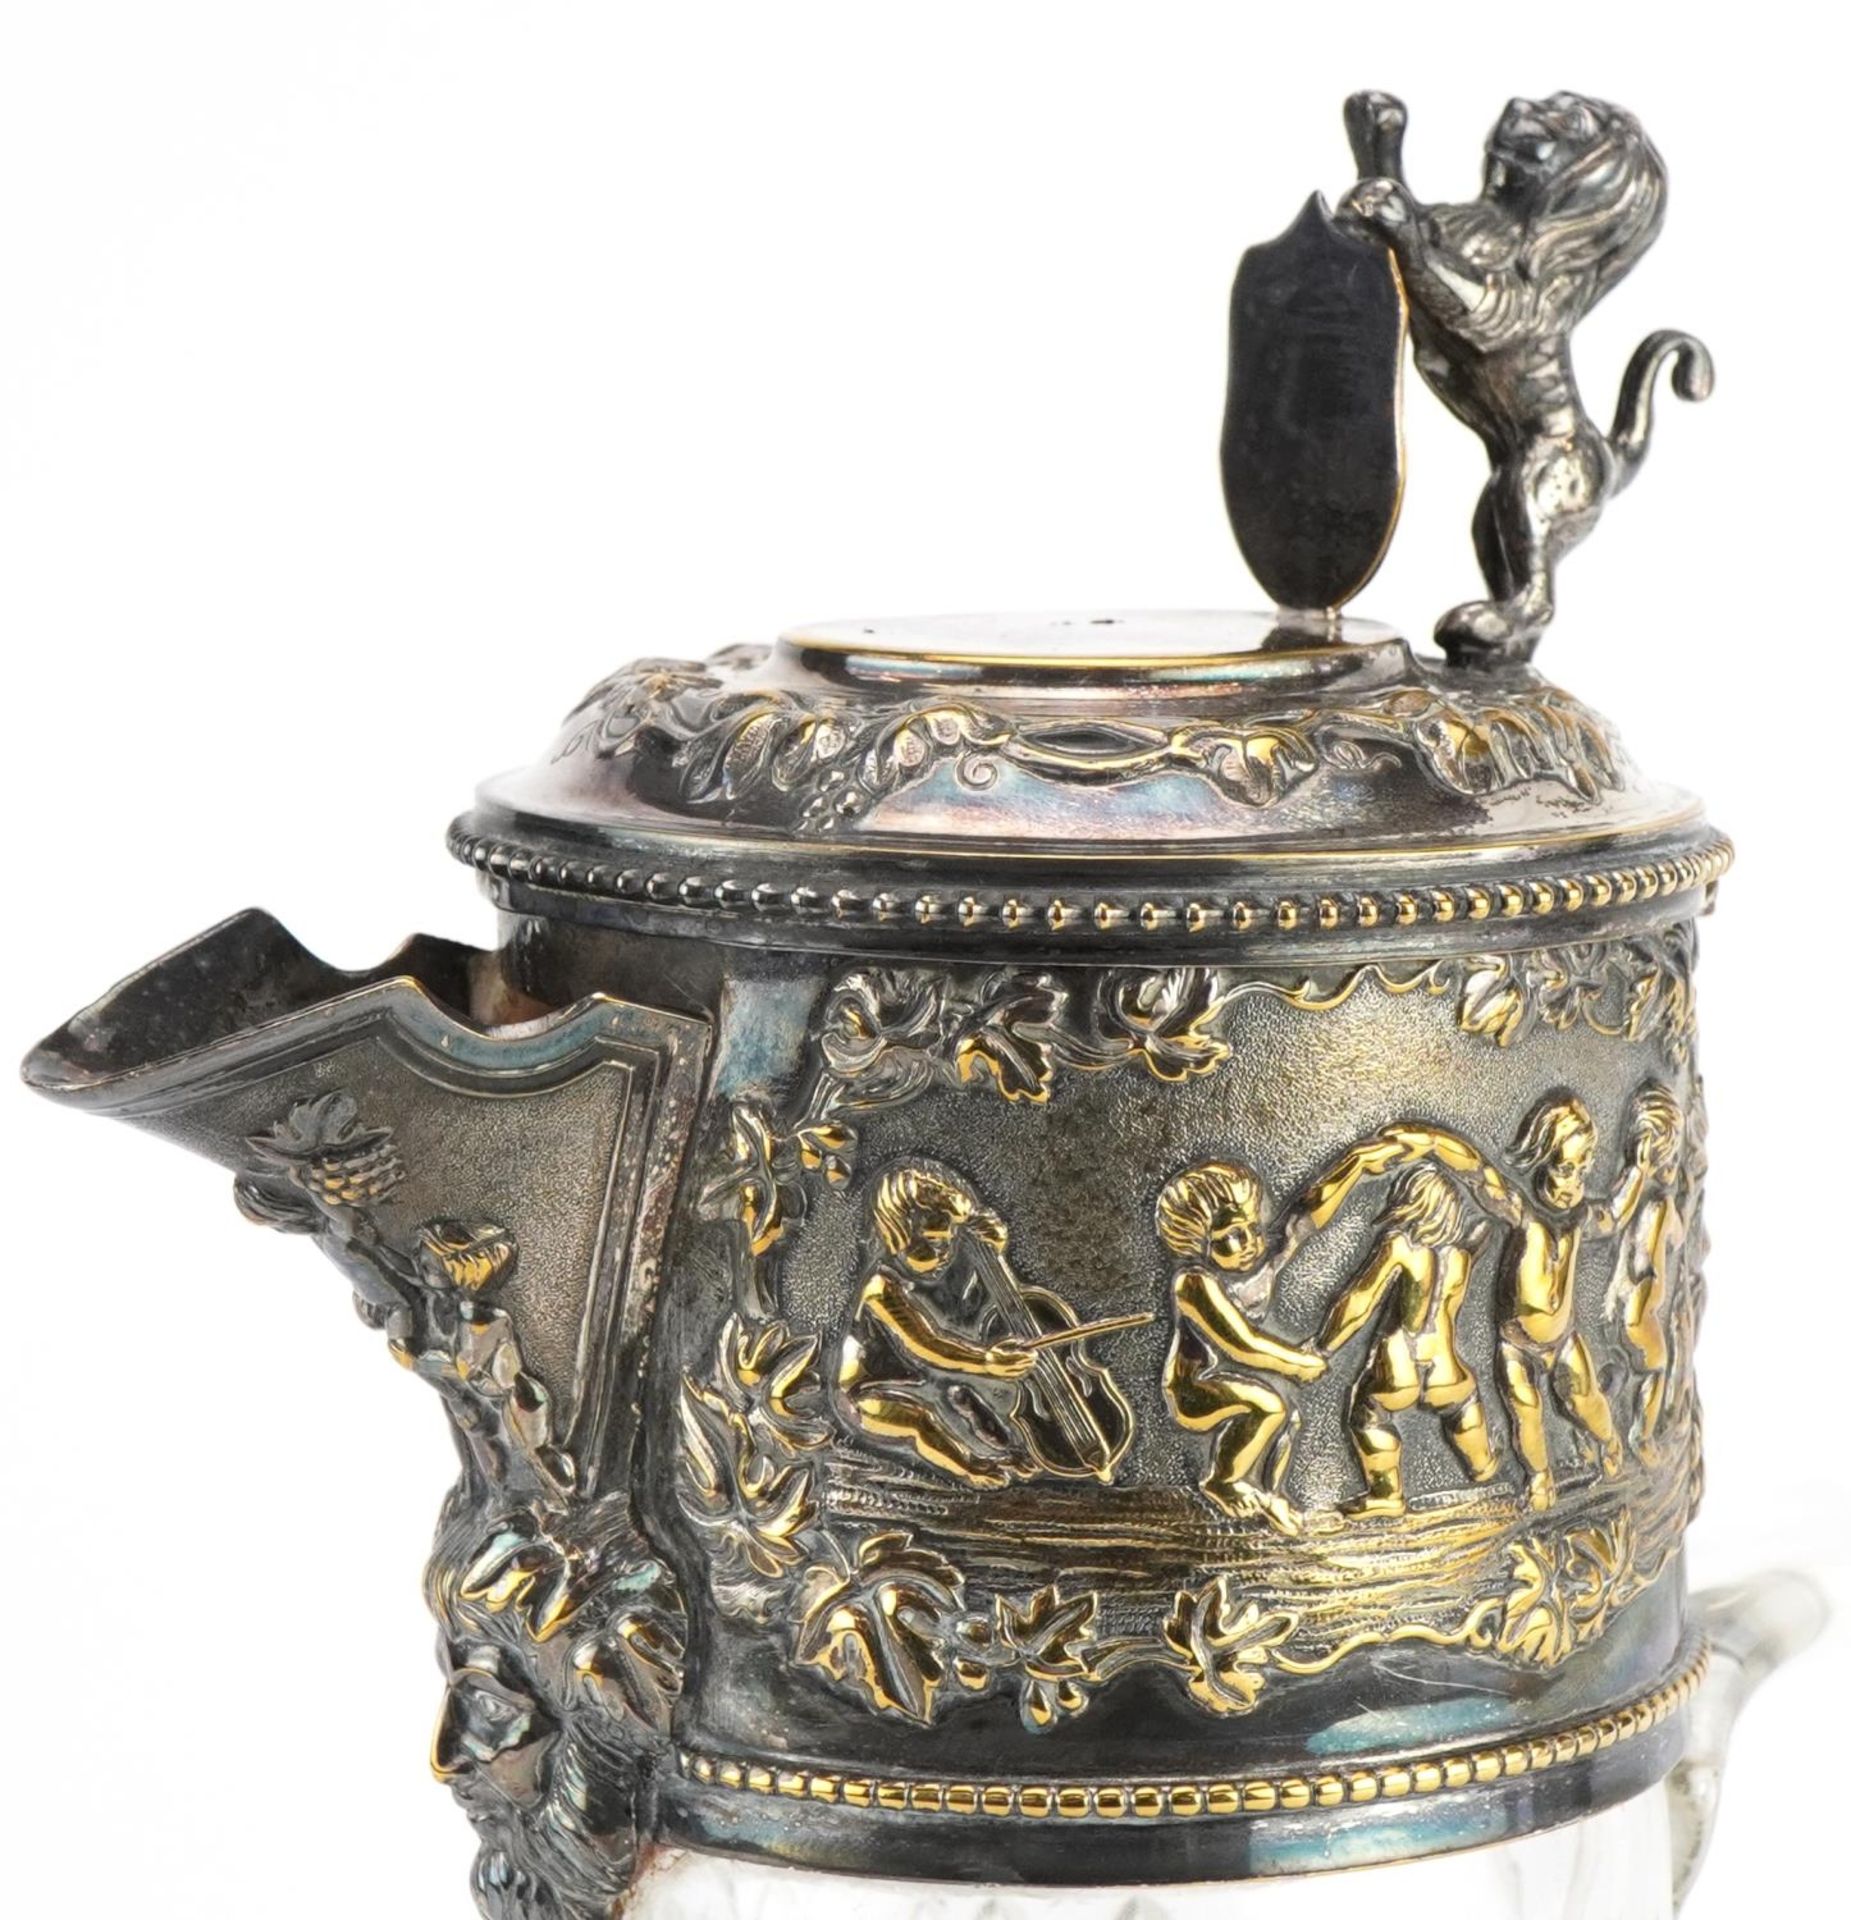 19th century cut glass claret jug with silver plated mounts embossed with a Bacchanalian scene - Image 2 of 5